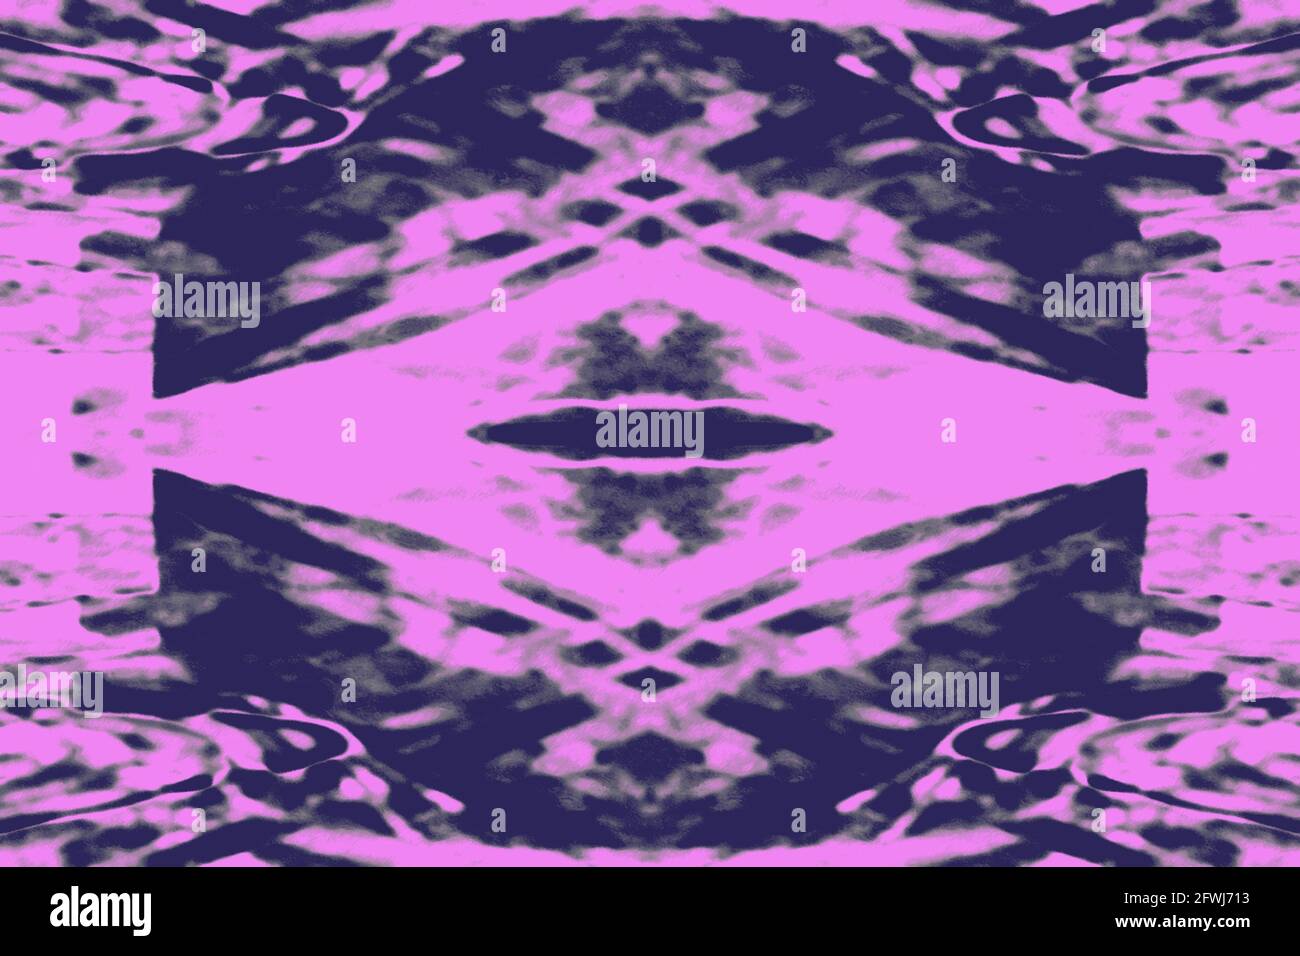 An abstract psychedelic grunge texture background image Stock Photo - Alamy